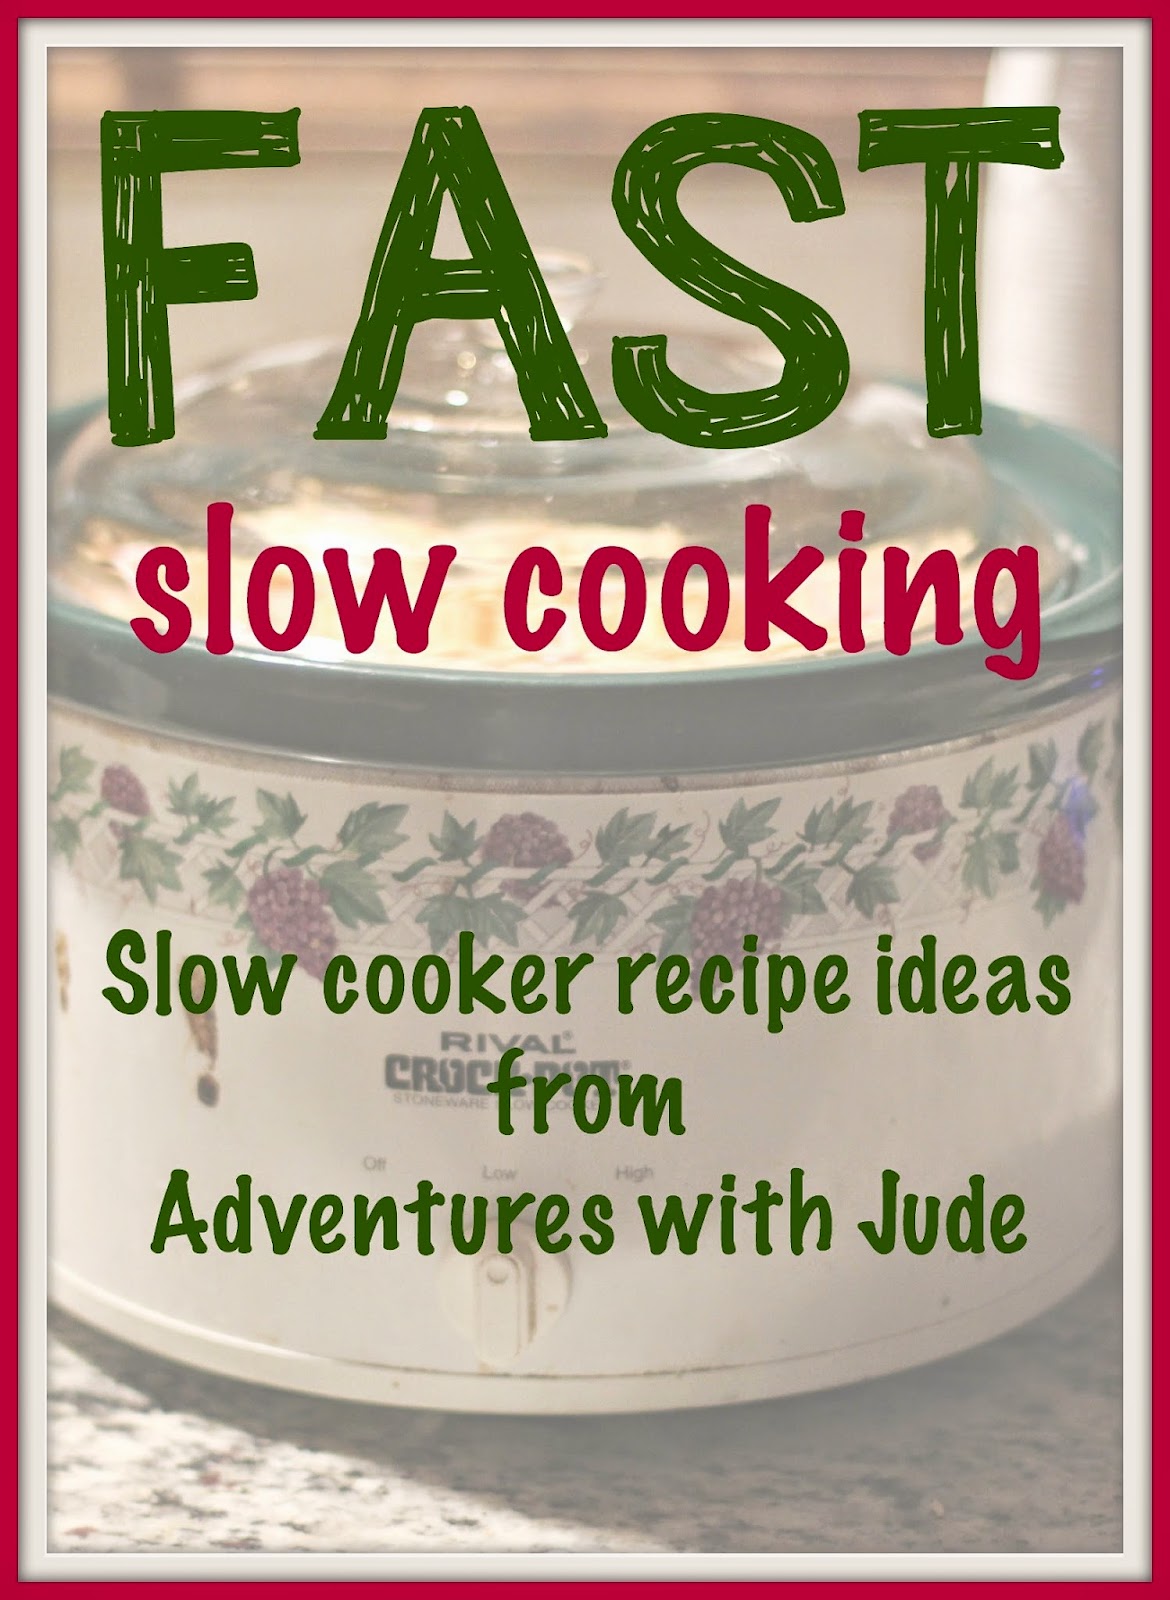 Fast Slow Cooking - slow cooker recipe ideas